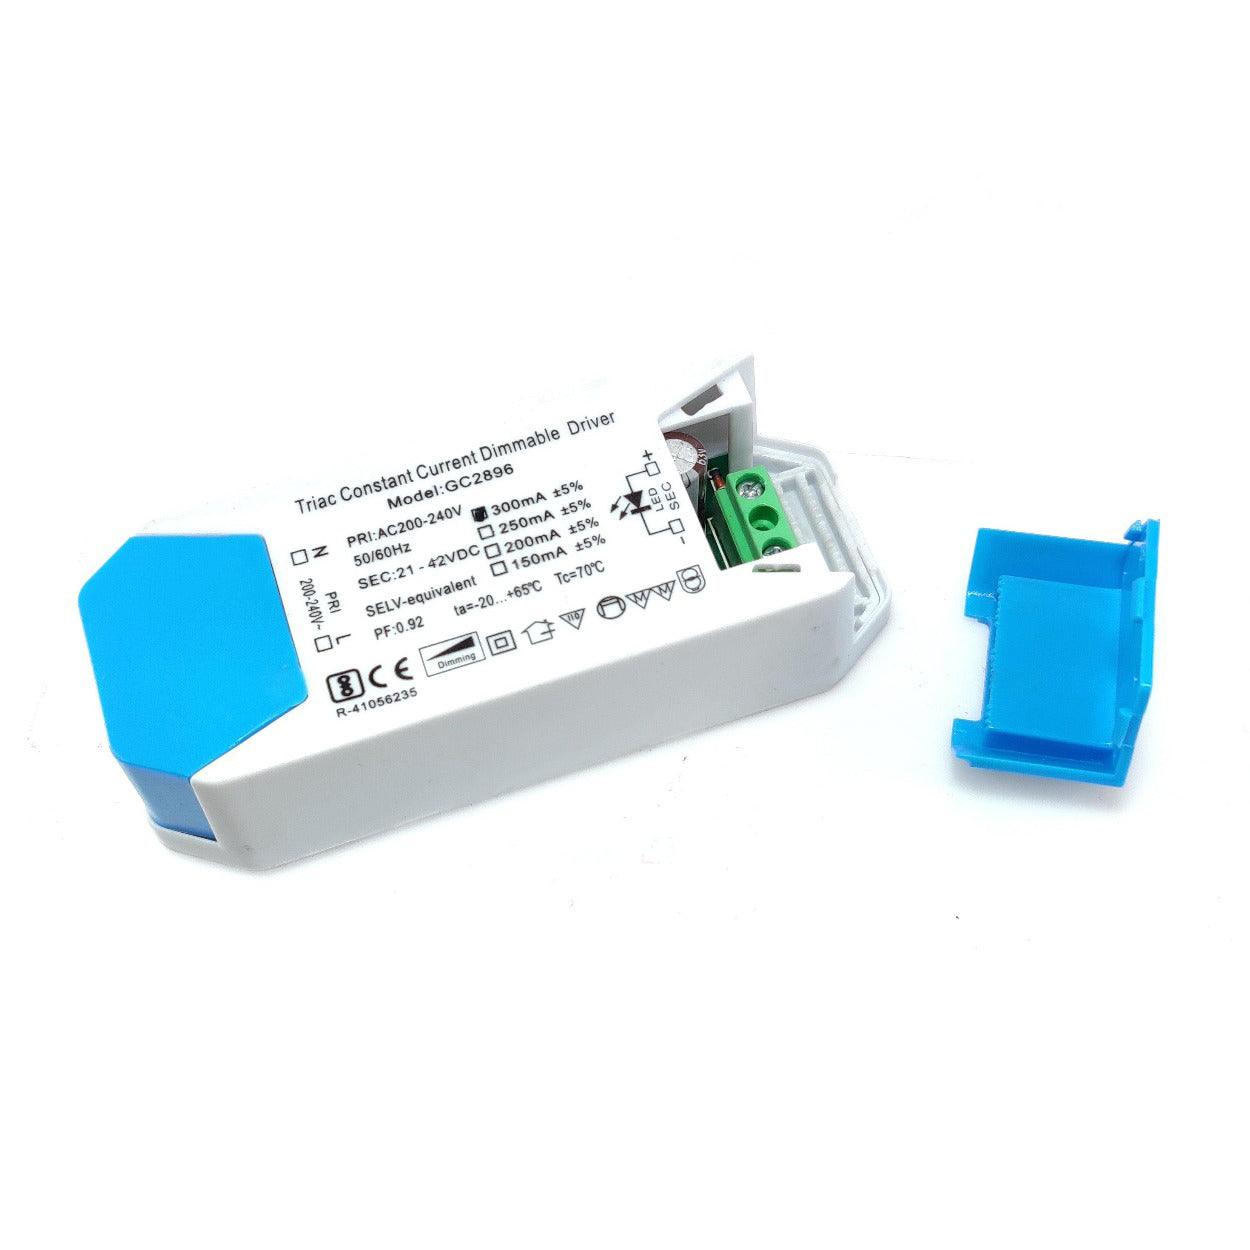 ANKUR PHASE CUT / TRIAC CONSTANT CURRENT DIMMABLE LED DRIVER - Ankur Lighting